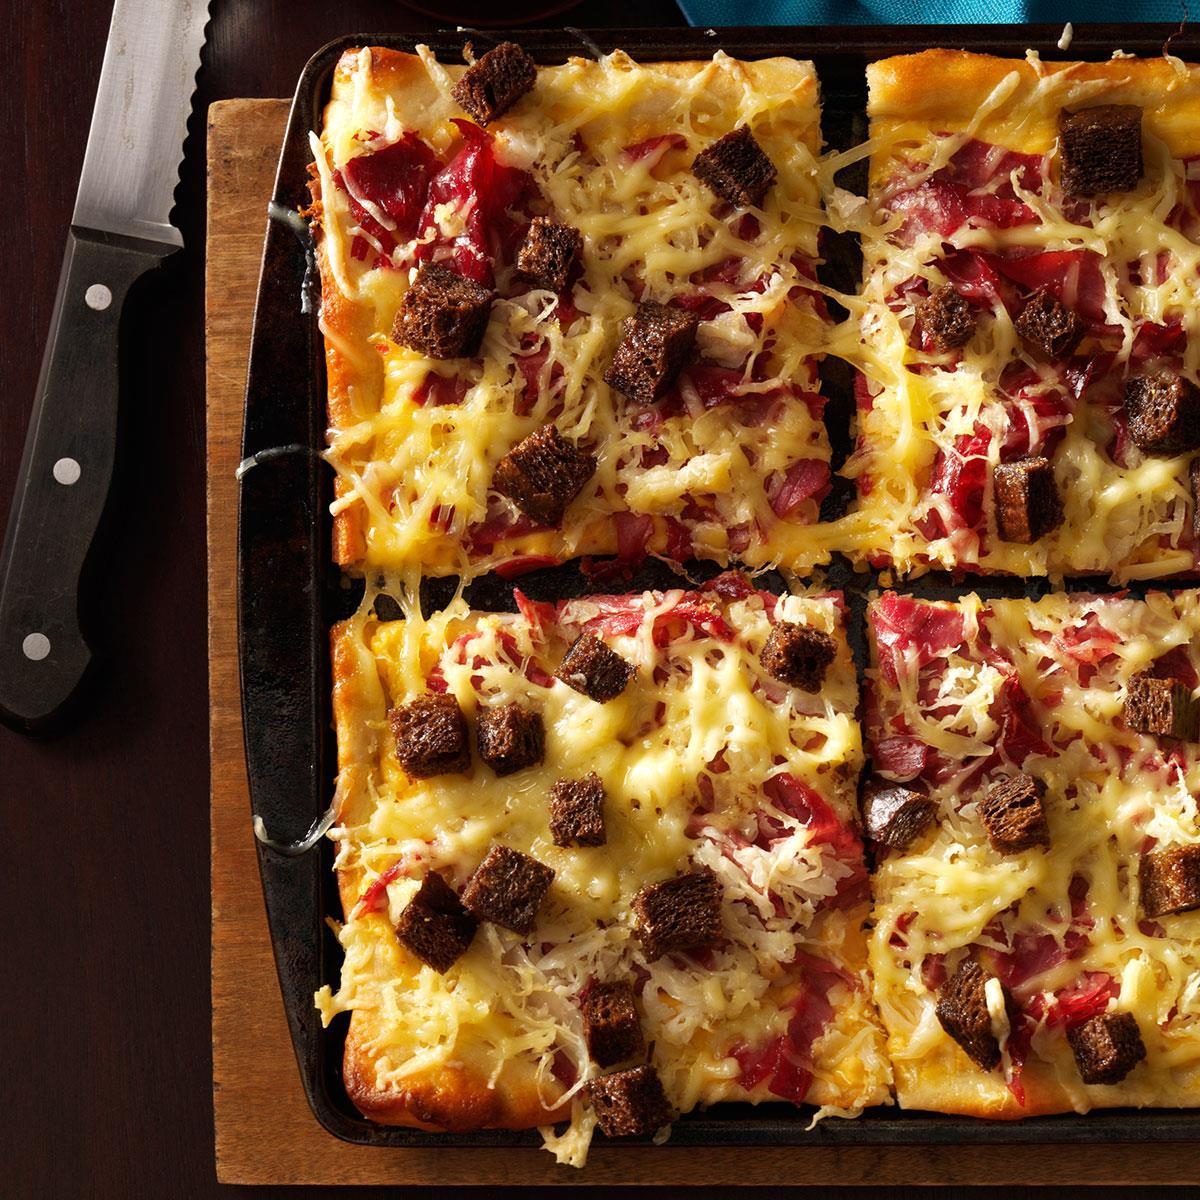 <p>I love a good Reuben sandwich and thought, “Why not make it into a pizza?” It's got extra cheesy goodness in the sauce, and smells wonderful coming out of the oven. —Tracy Miller, Wakeman, Ohio</p> <div class="listicle-page__buttons"> <div class="listicle-page__cta-button"><a href='https://www.tasteofhome.com/recipes/reuben-style-pizza/'>Get Recipe</a></div> </div>